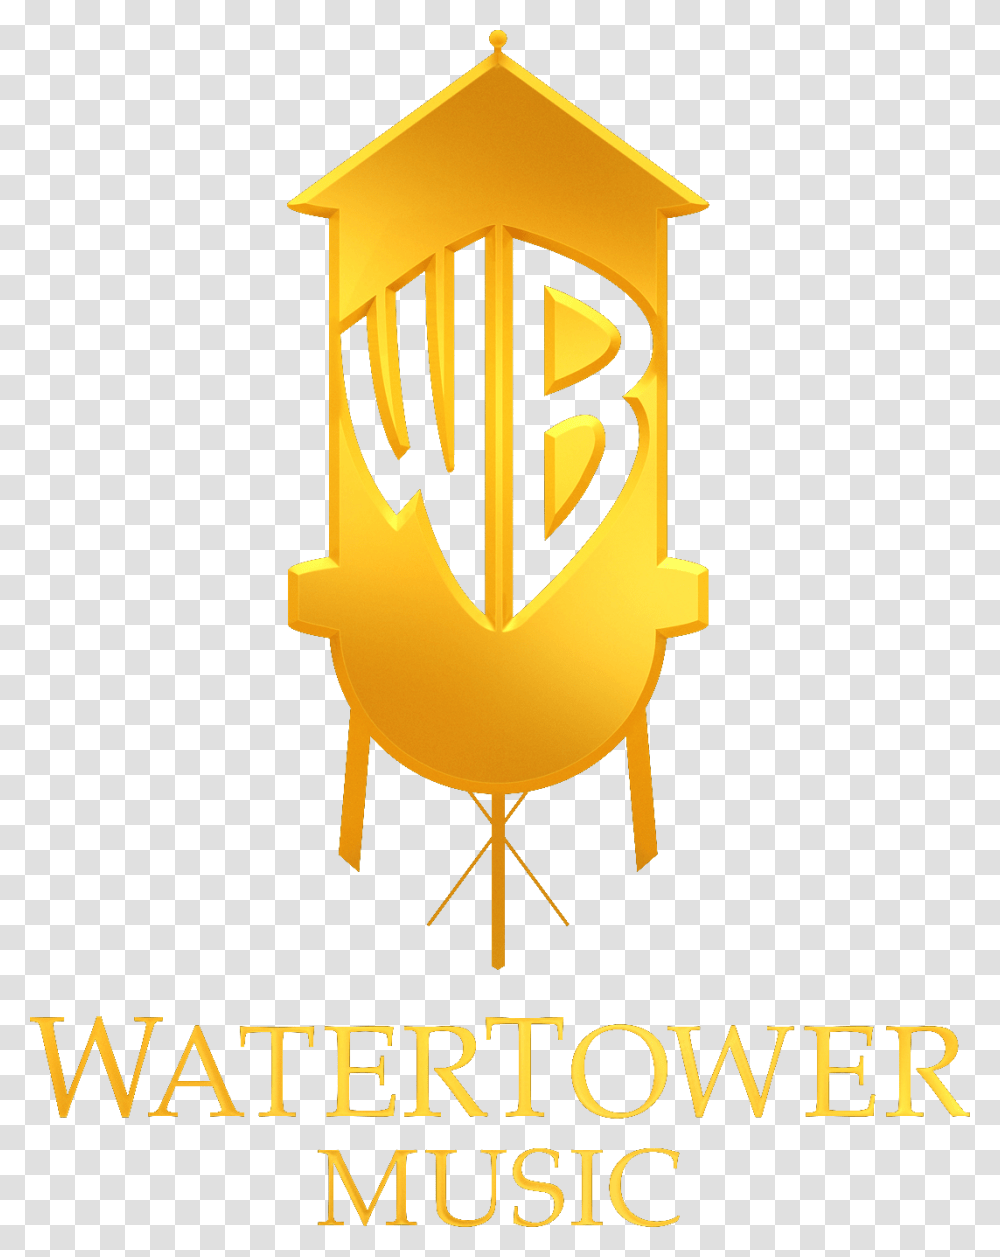 Soundtrack Album On Watertower Music, Poster, Advertisement Transparent Png